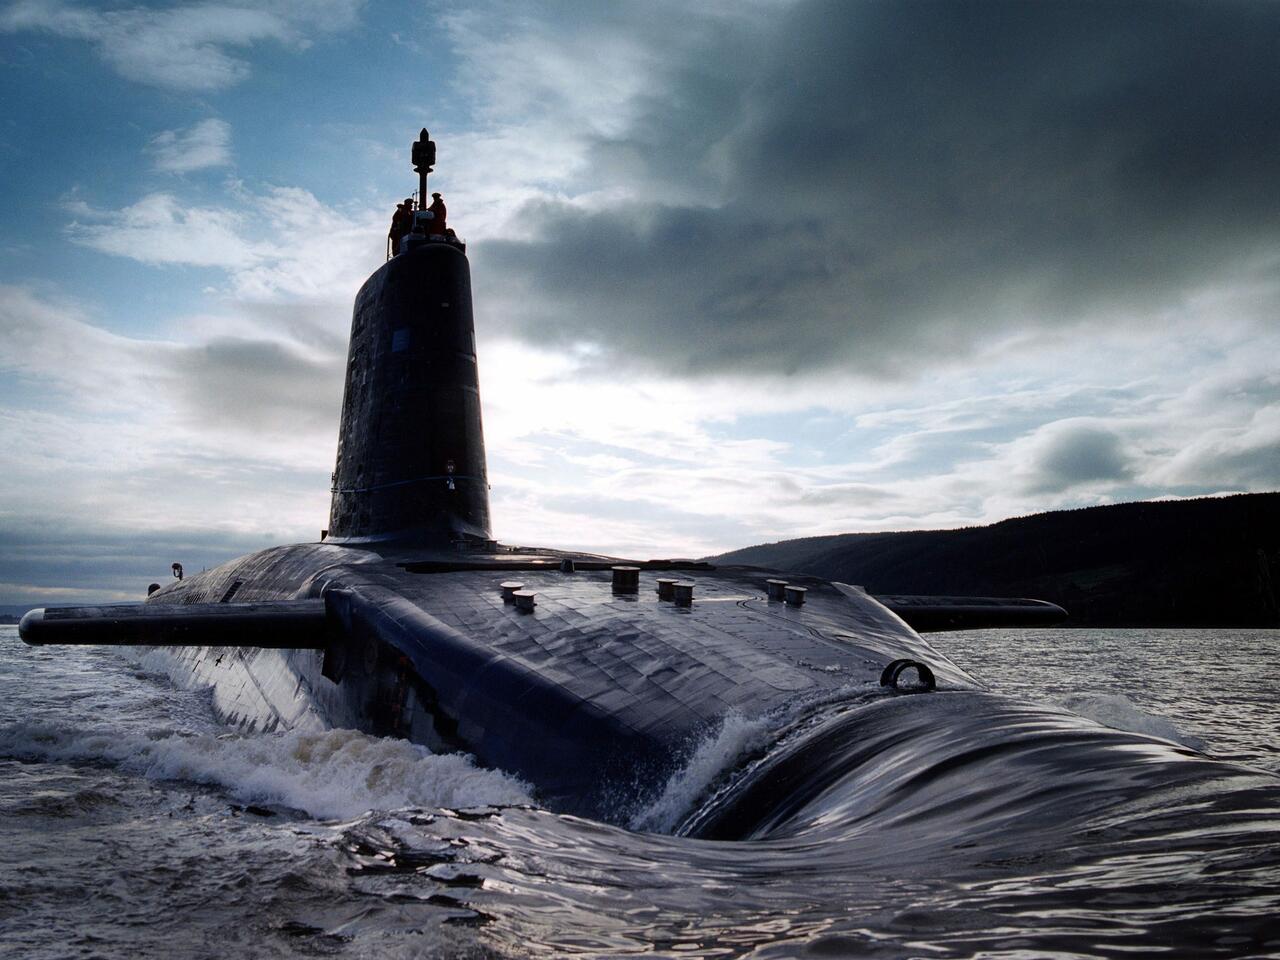 British Nuclear Submarine Catches Fire During "Top Secret Mission" In North Atlantic